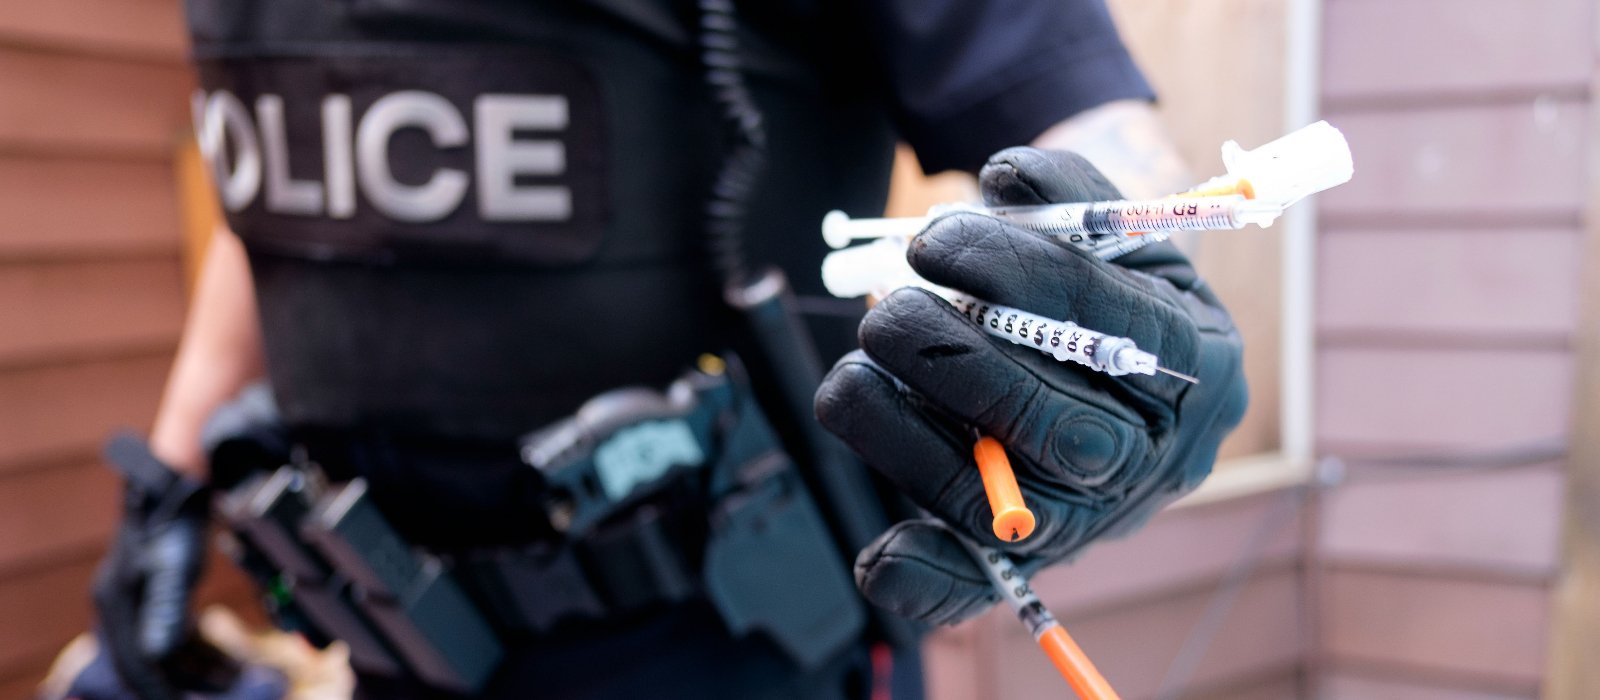 An Ottawa Police Service officer collects used needles he finds out on patrol